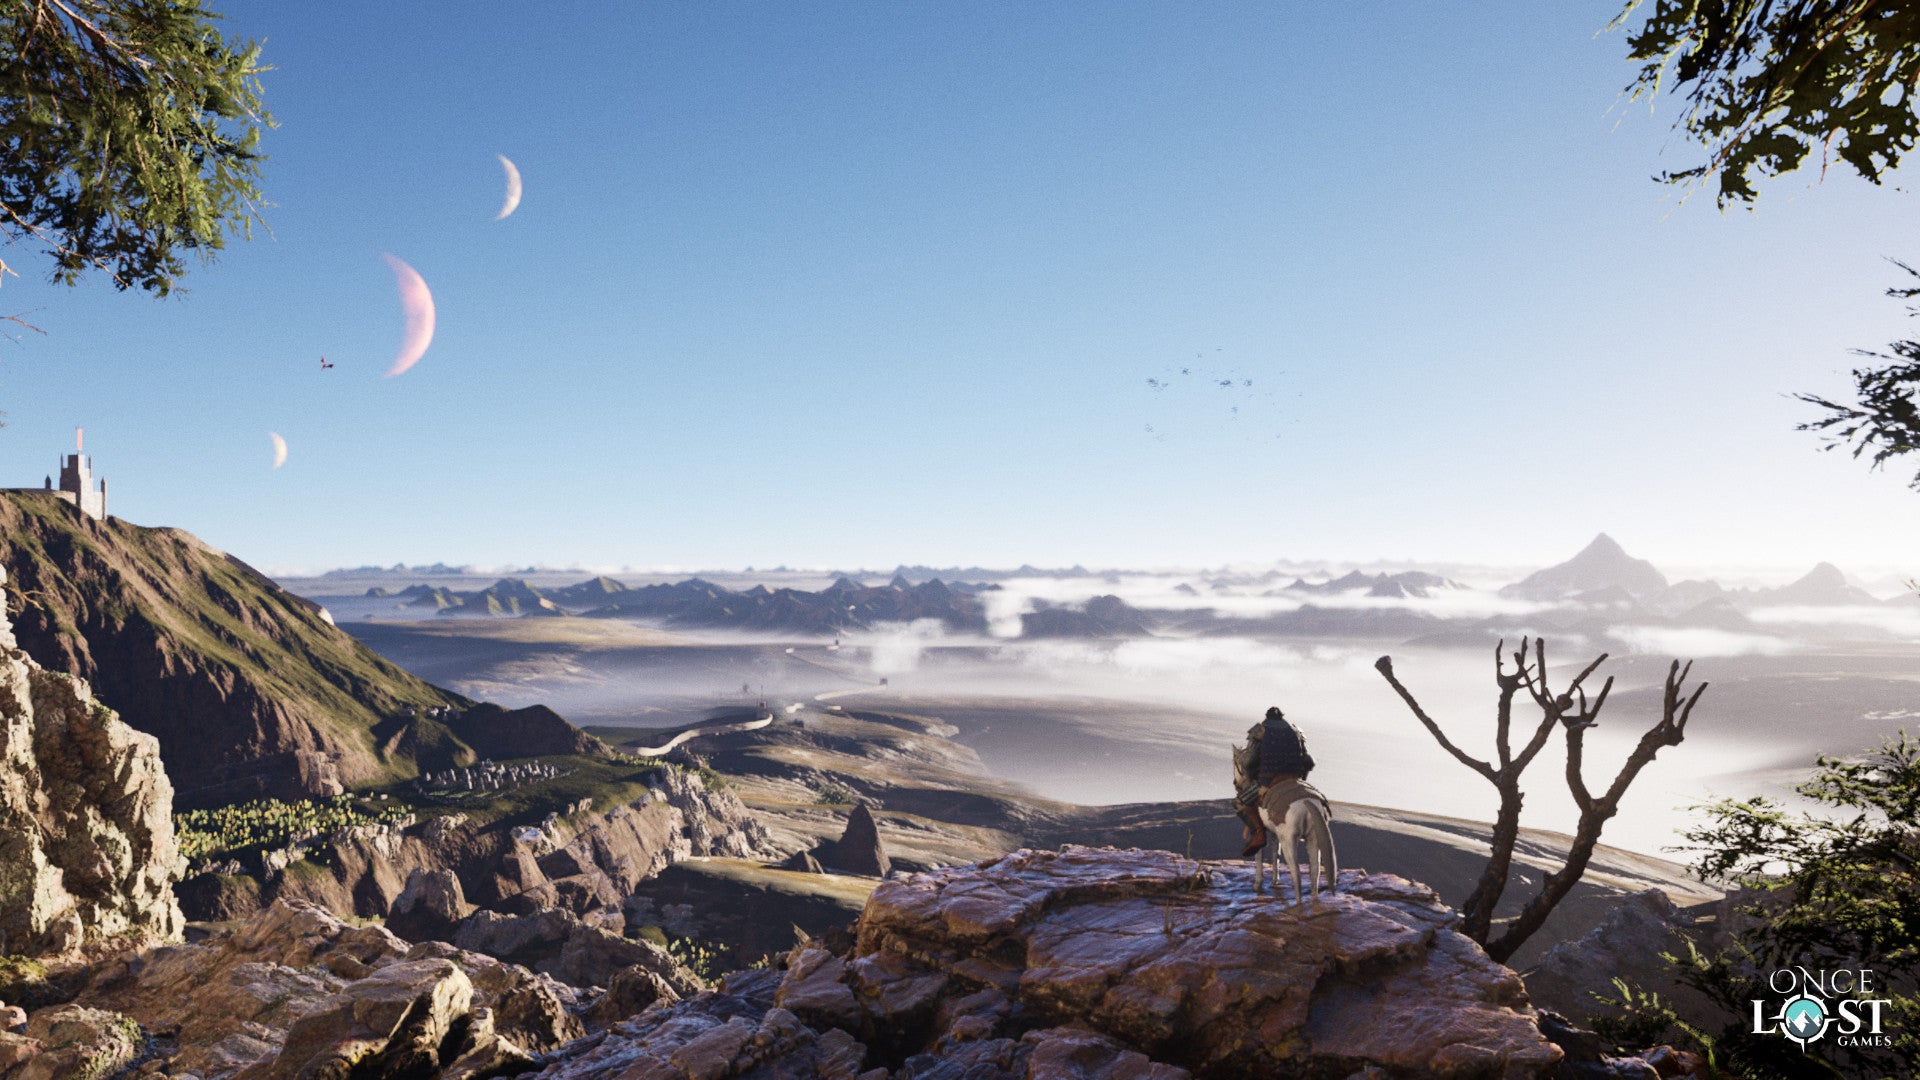 The Wayward Realms teaser image - A knight on a horse stands at the edge of a cliff looking over a vista of archipelagos with three moons in the sky